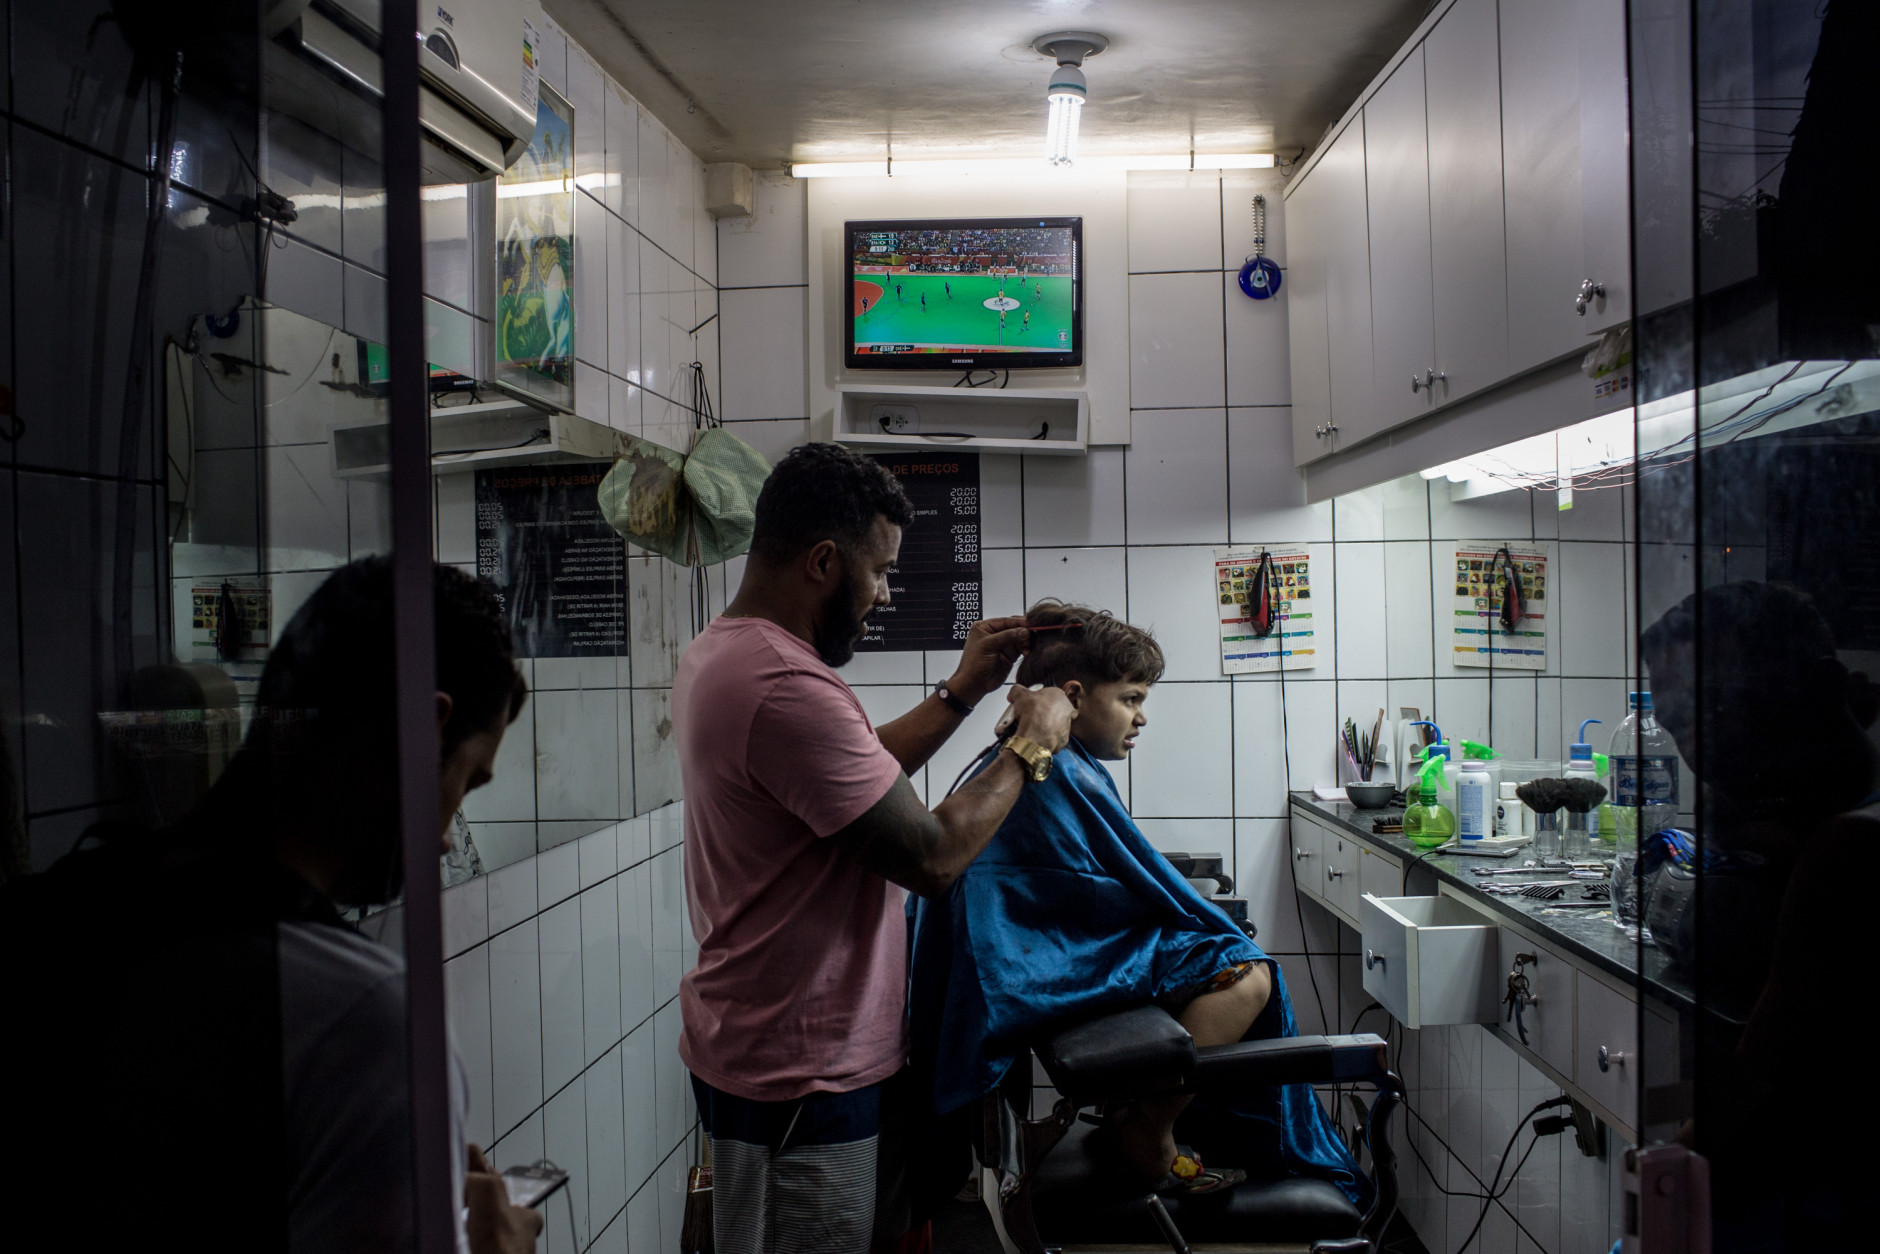 RIO DE JANEIRO, BRAZIL - AUGUST 15:  A young boy grimaces while getting his haircut as the Olympic games is shown on a tv screen at a hair salon on the outskirts of a 'favela' community on August 15, 2016 in Rio de Janeiro, Brazil.  Brazil is currently hosting the 2016 Summer Olympic games despite the dismissal of President Dilma Rousseff, pollution concerns, ongoing crime problems and a failing economy. Around 1.4 million residents, or approximately 22 percent of Rio's population, reside in favelas which often lack proper sanitation, health care, education and security, for many of these residents watching the Olympic games on tv is their only access to the event.  (Photo by Chris McGrath/Getty Images)